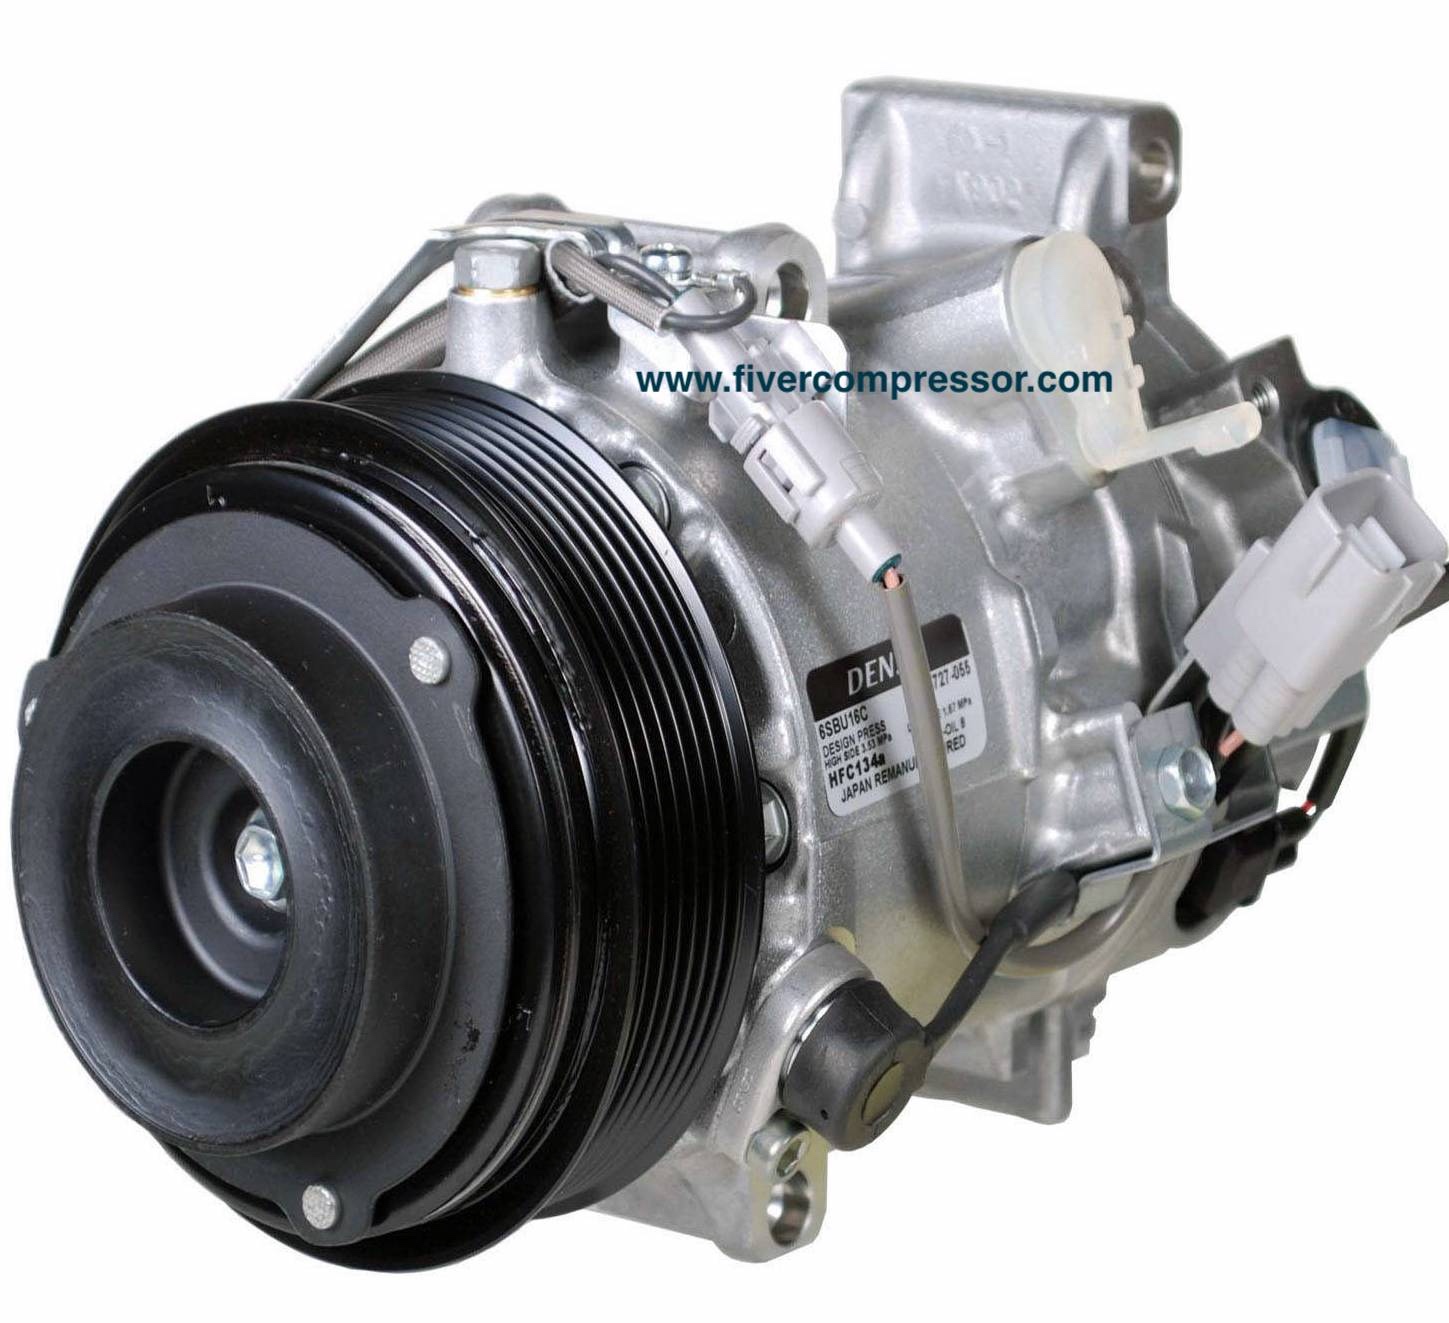 AC Compressor 883103A441, 883103A560, 8832036530, 883203A280, 883203A310 for Lexus GS350(GRS195/GRS196) Lexus IS250(GSE25) and Toyota Crown(GRS181/GRS183) 2003-2013